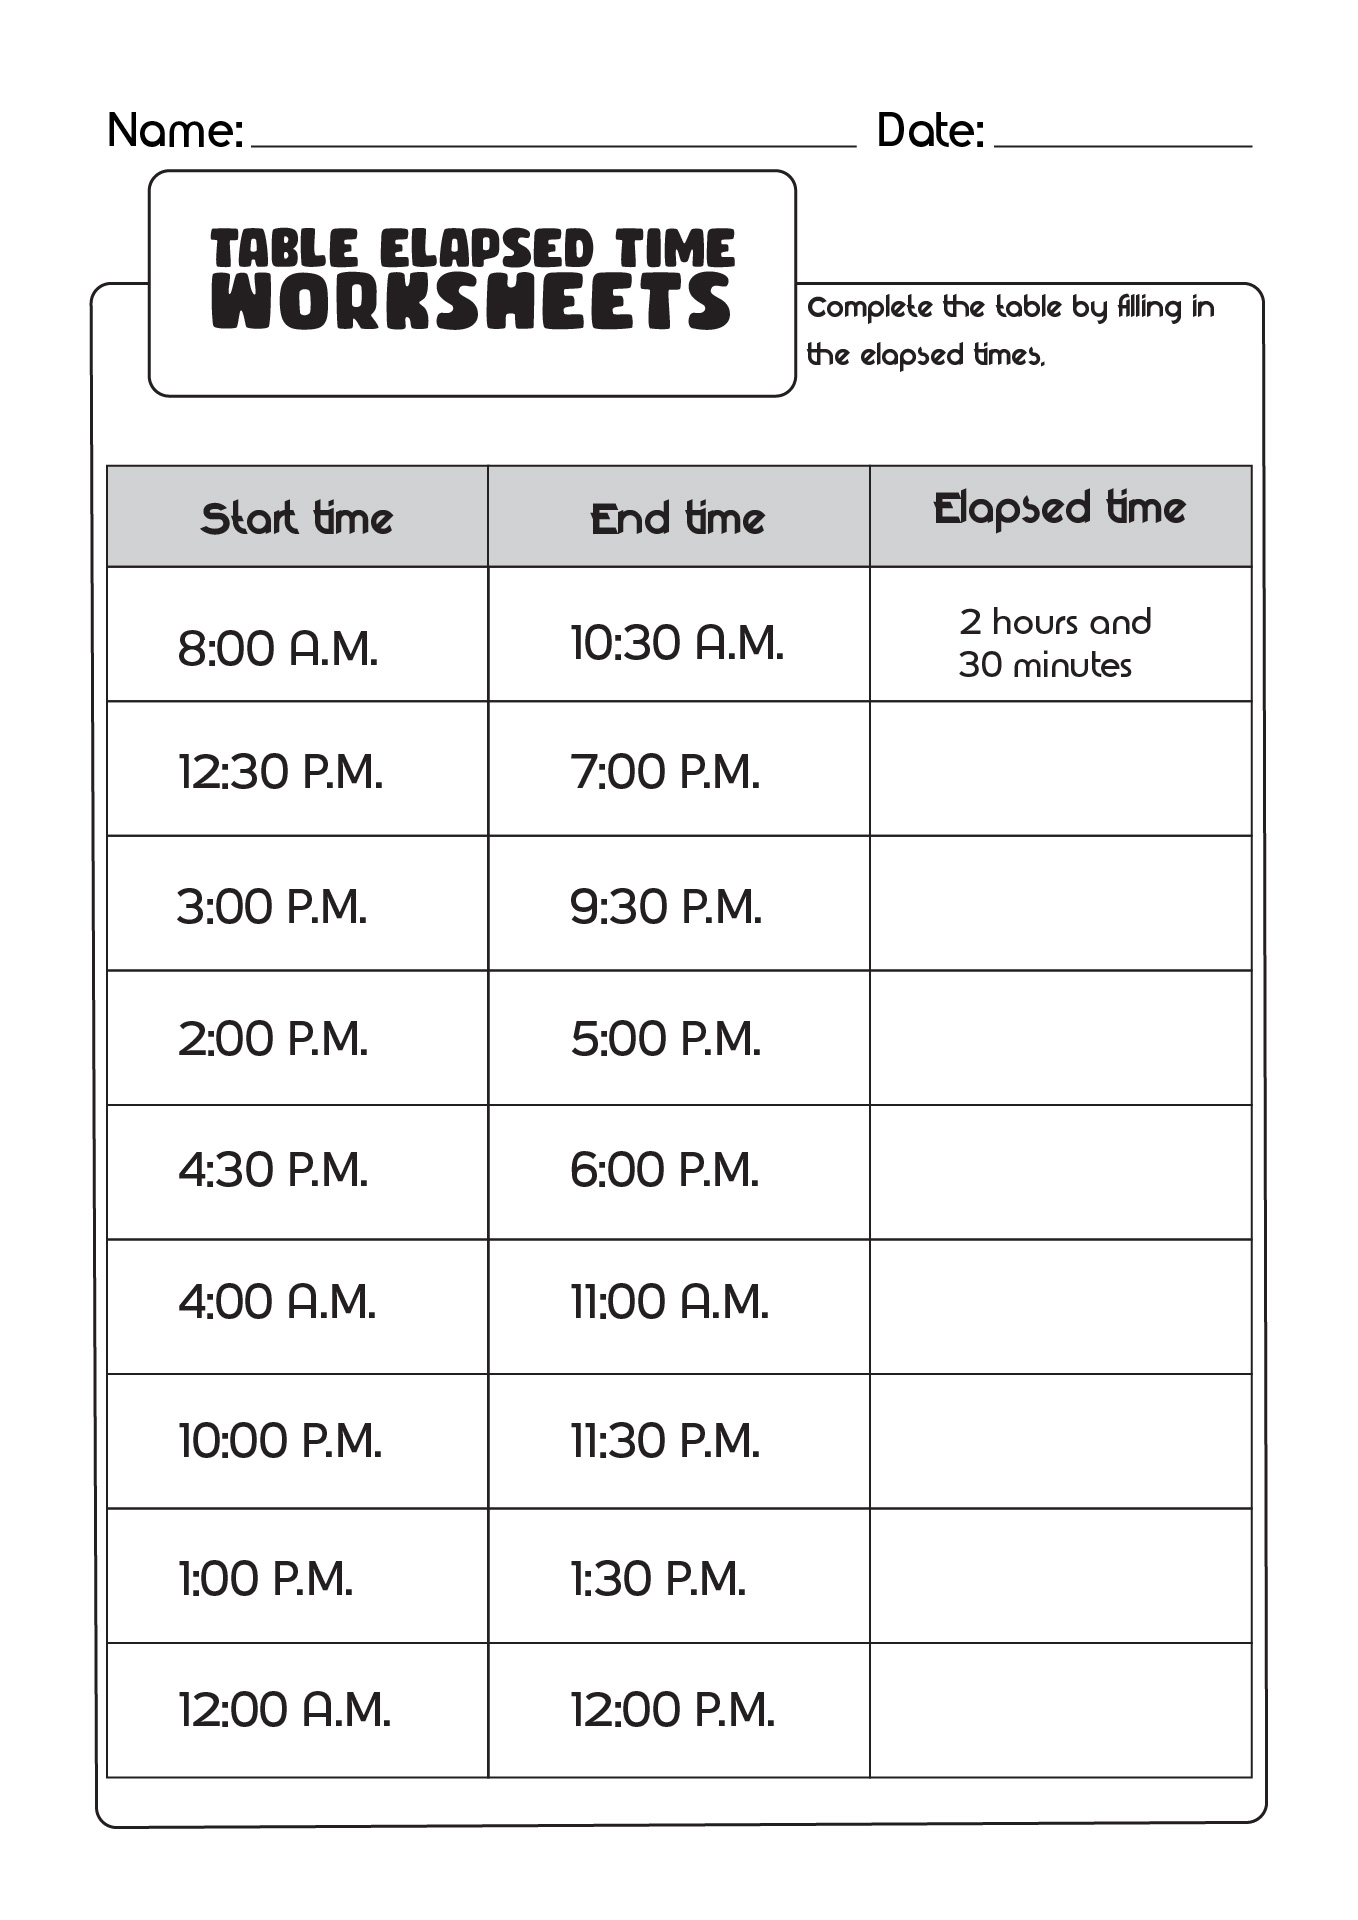 Table Elapsed Time Worksheets